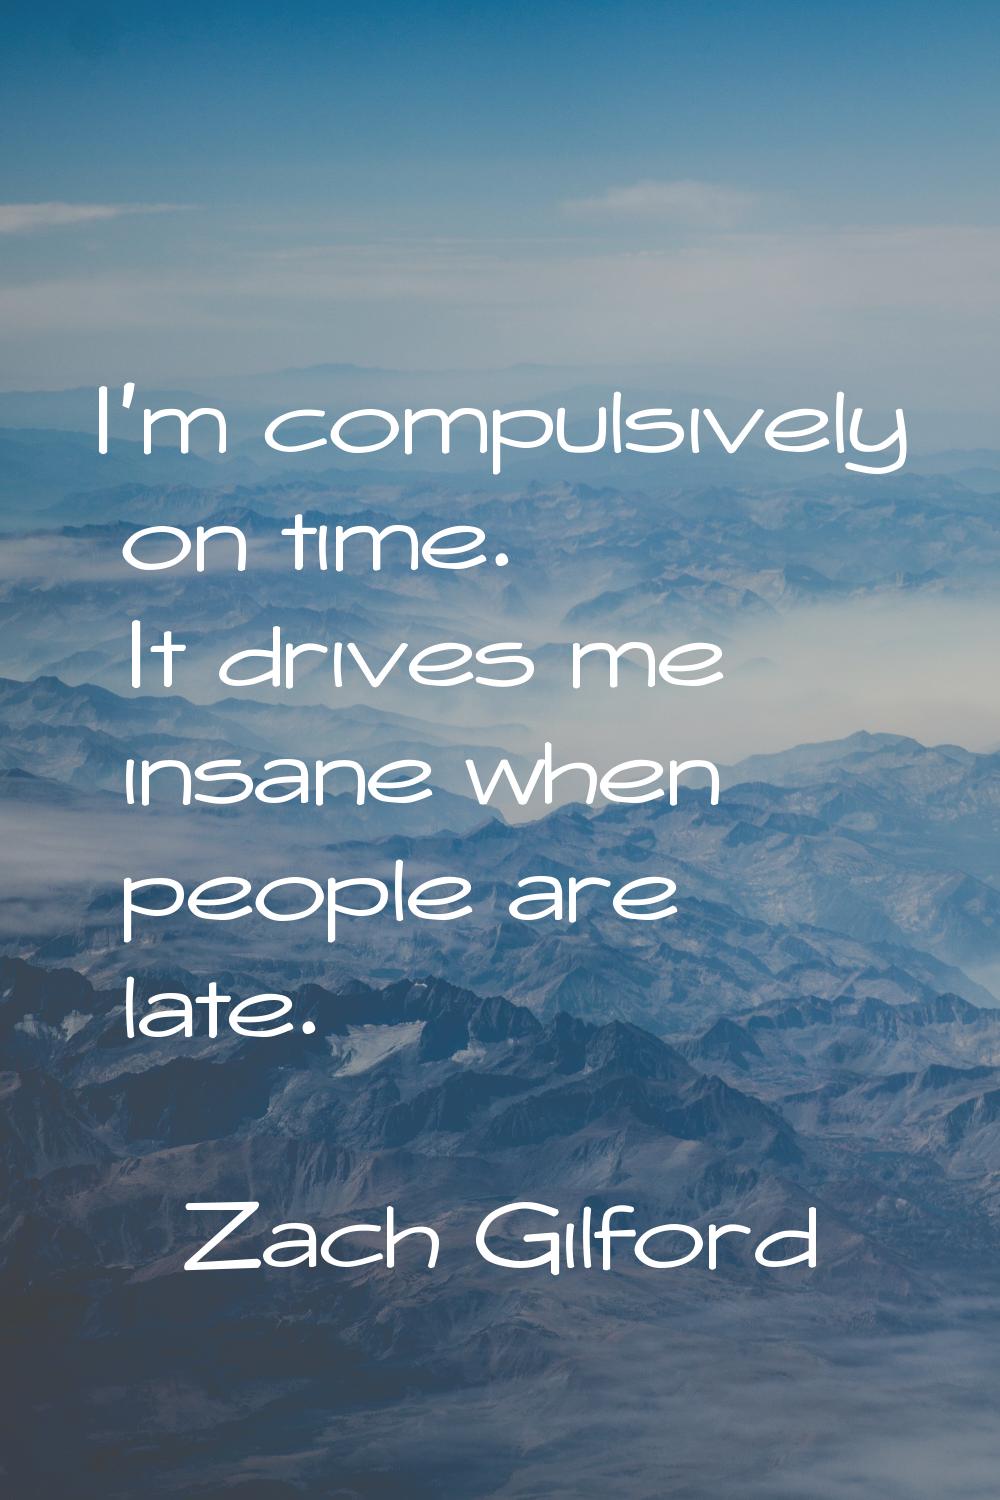 I'm compulsively on time. It drives me insane when people are late.